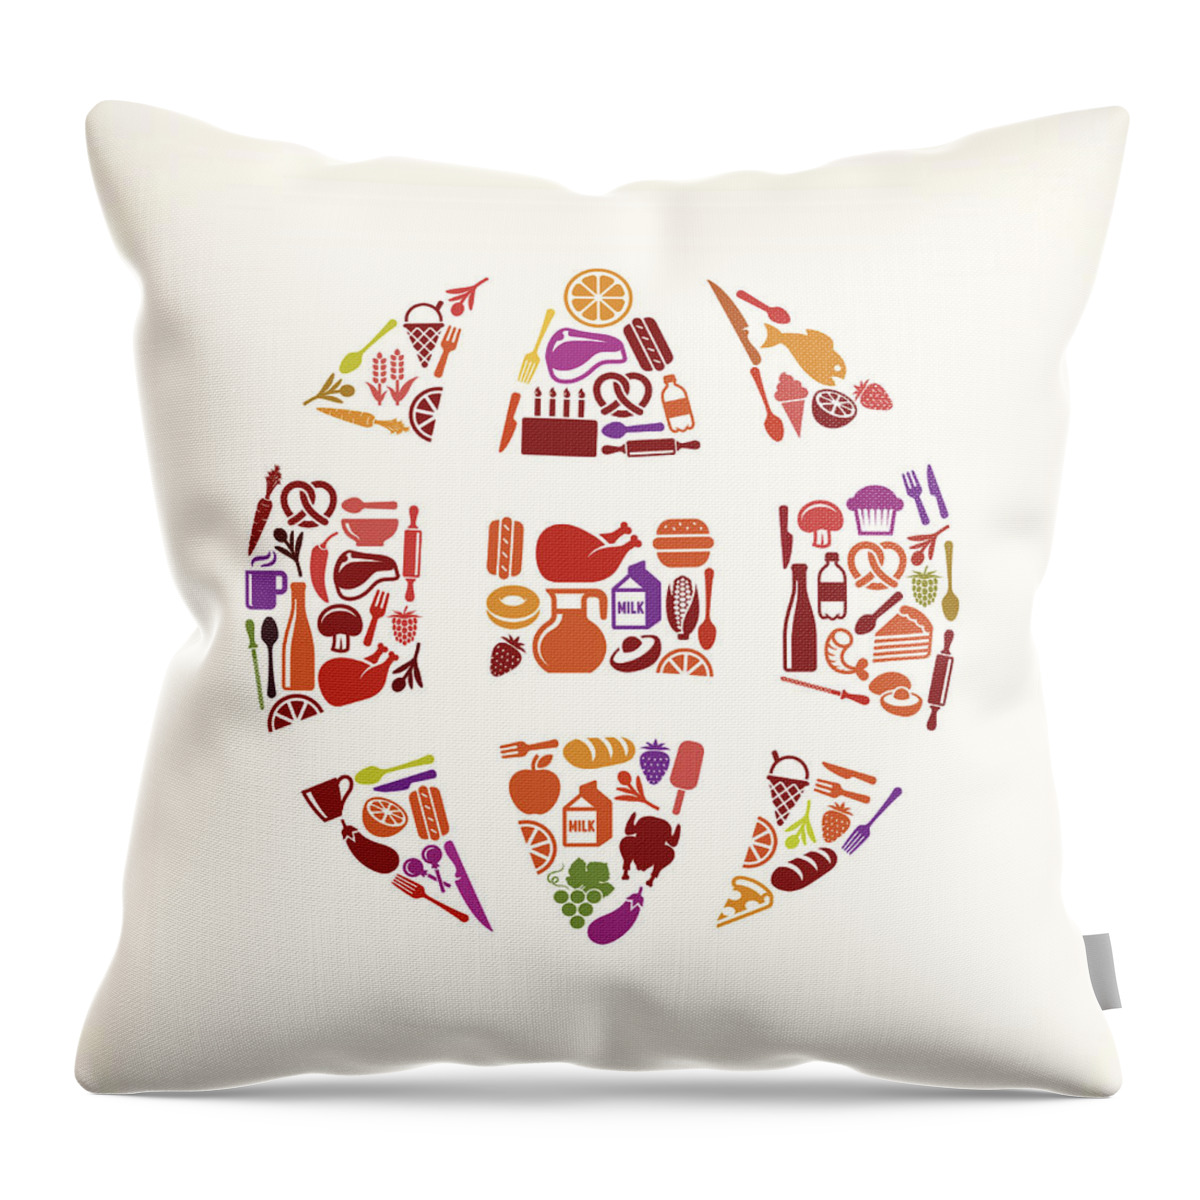 Chicken Meat Throw Pillow featuring the digital art Globe Food & Drink Royalty Free Vector by Bubaone